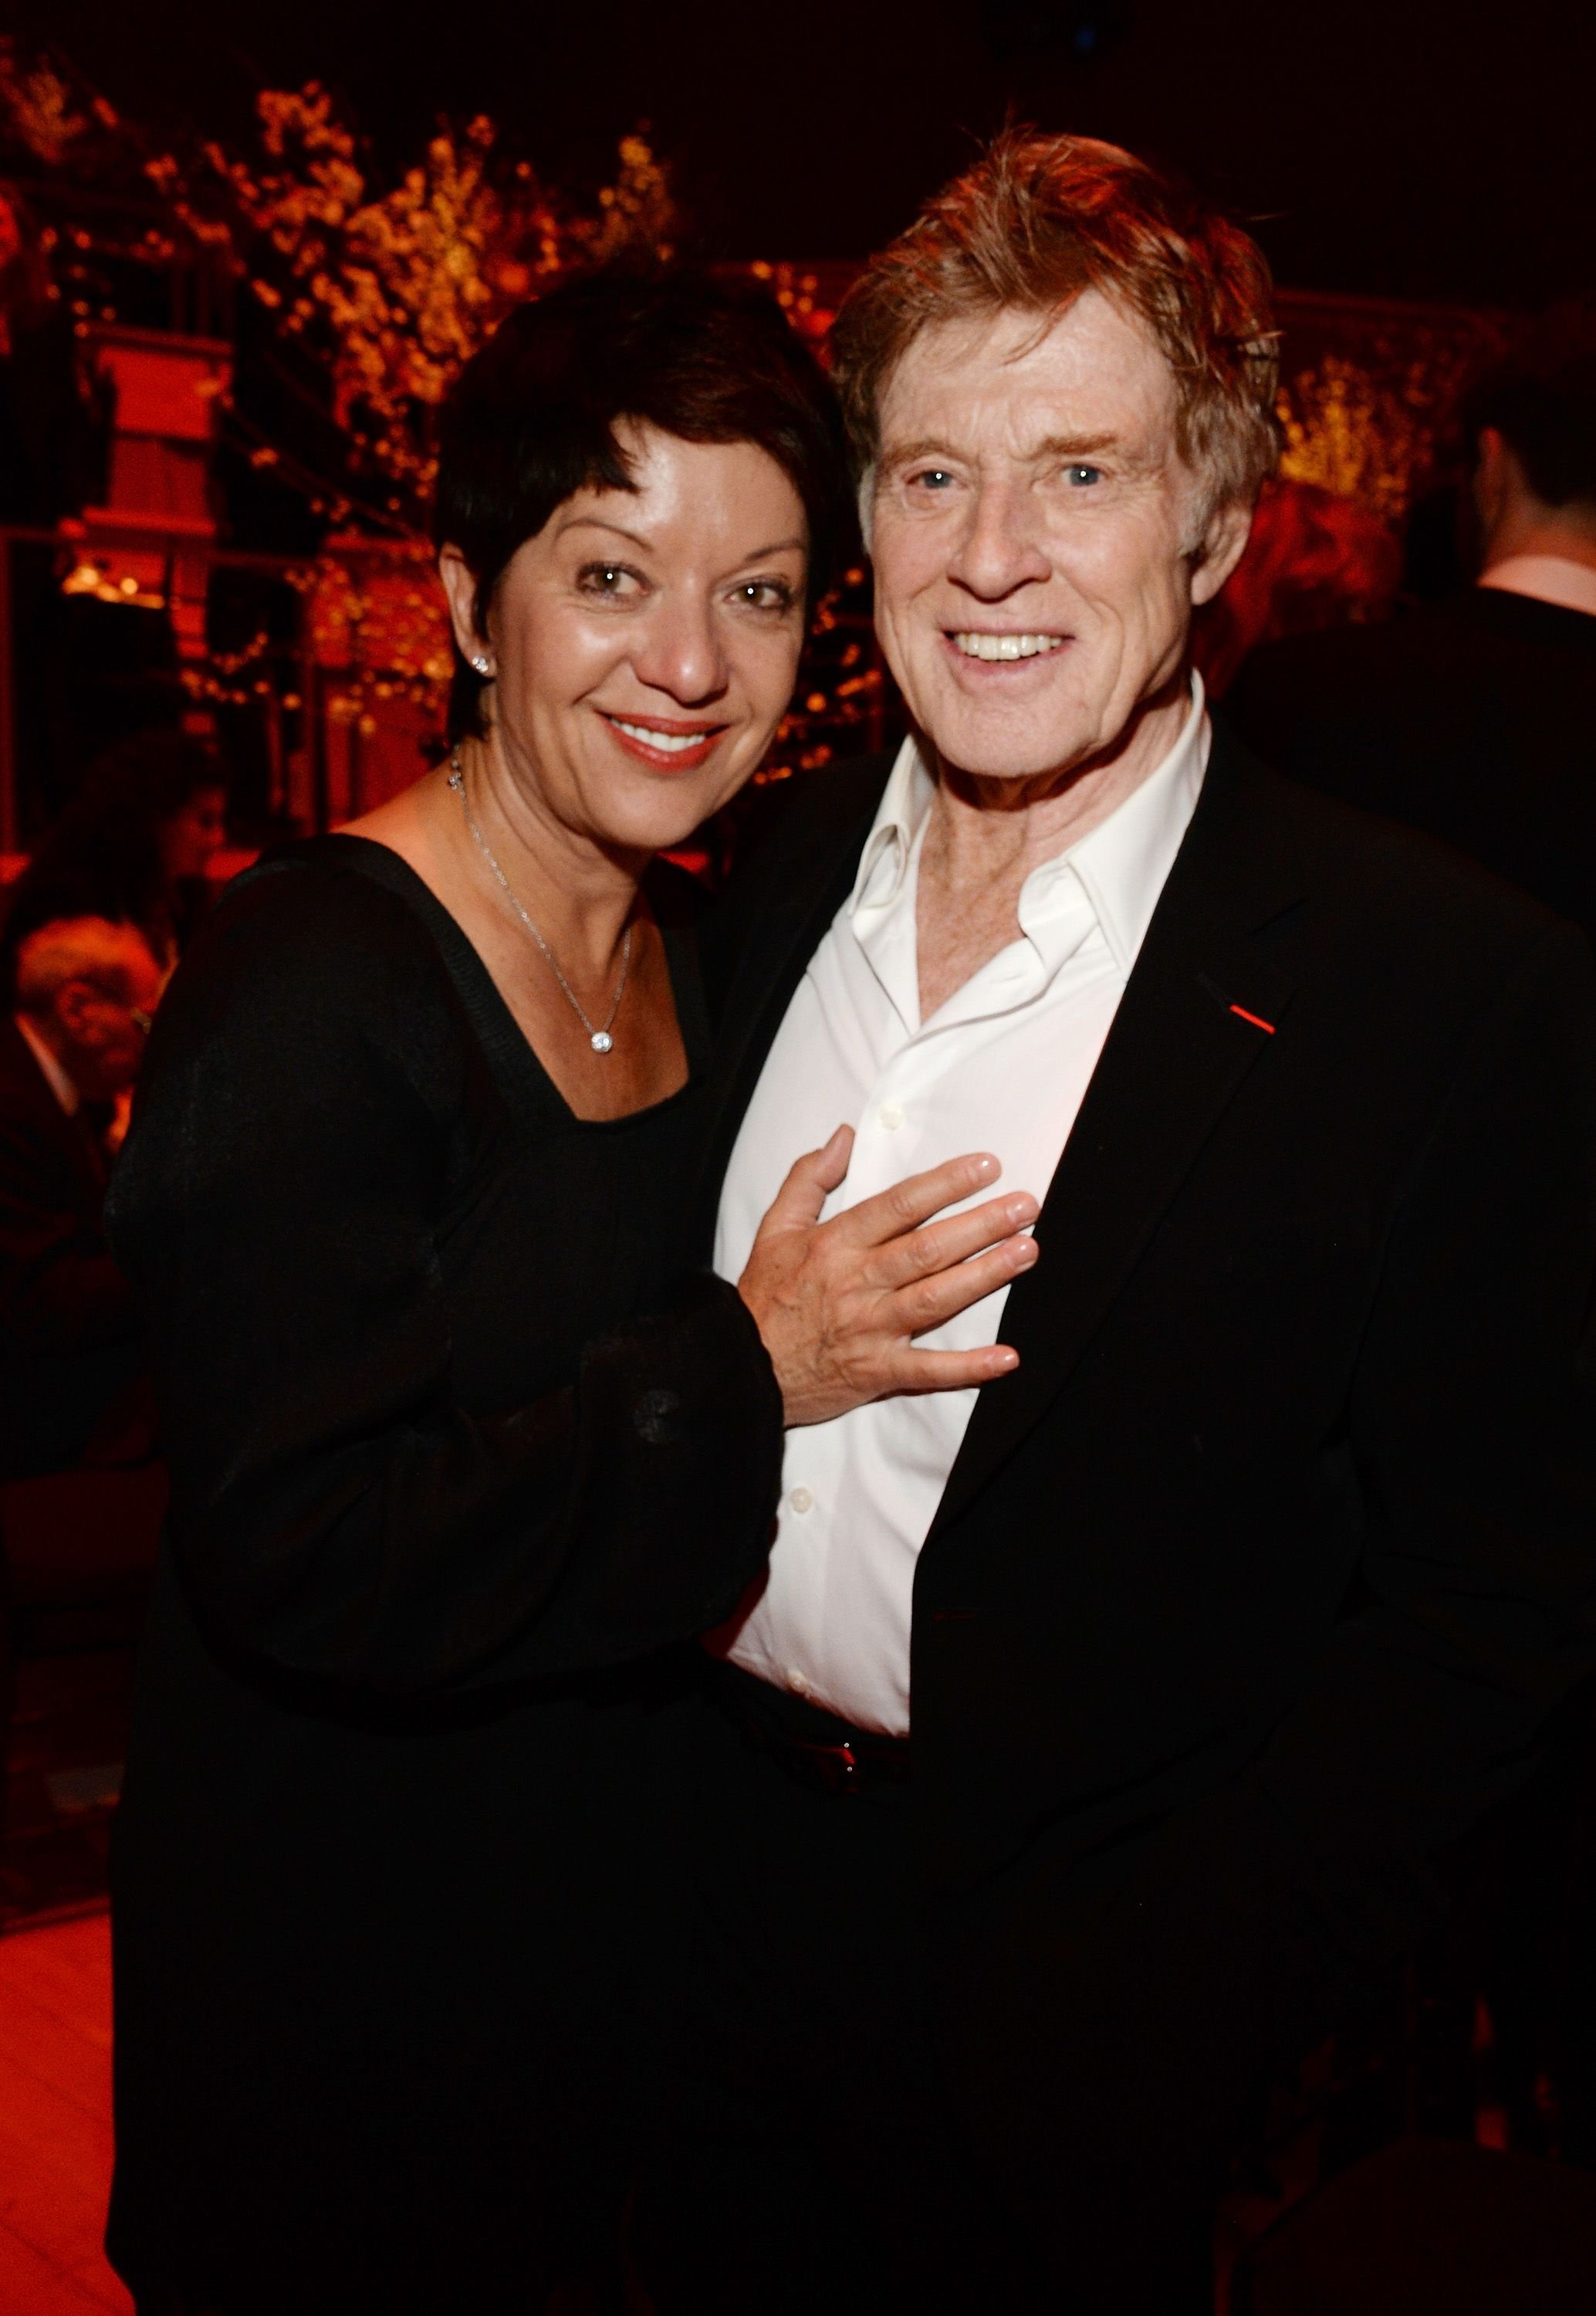 Robert Redford and wife Sibylle Szaggars during the 42nd Chaplin Award Gala at Jazz at Lincoln Center on April 27, 2015 in New York City. | Source: Getty Images